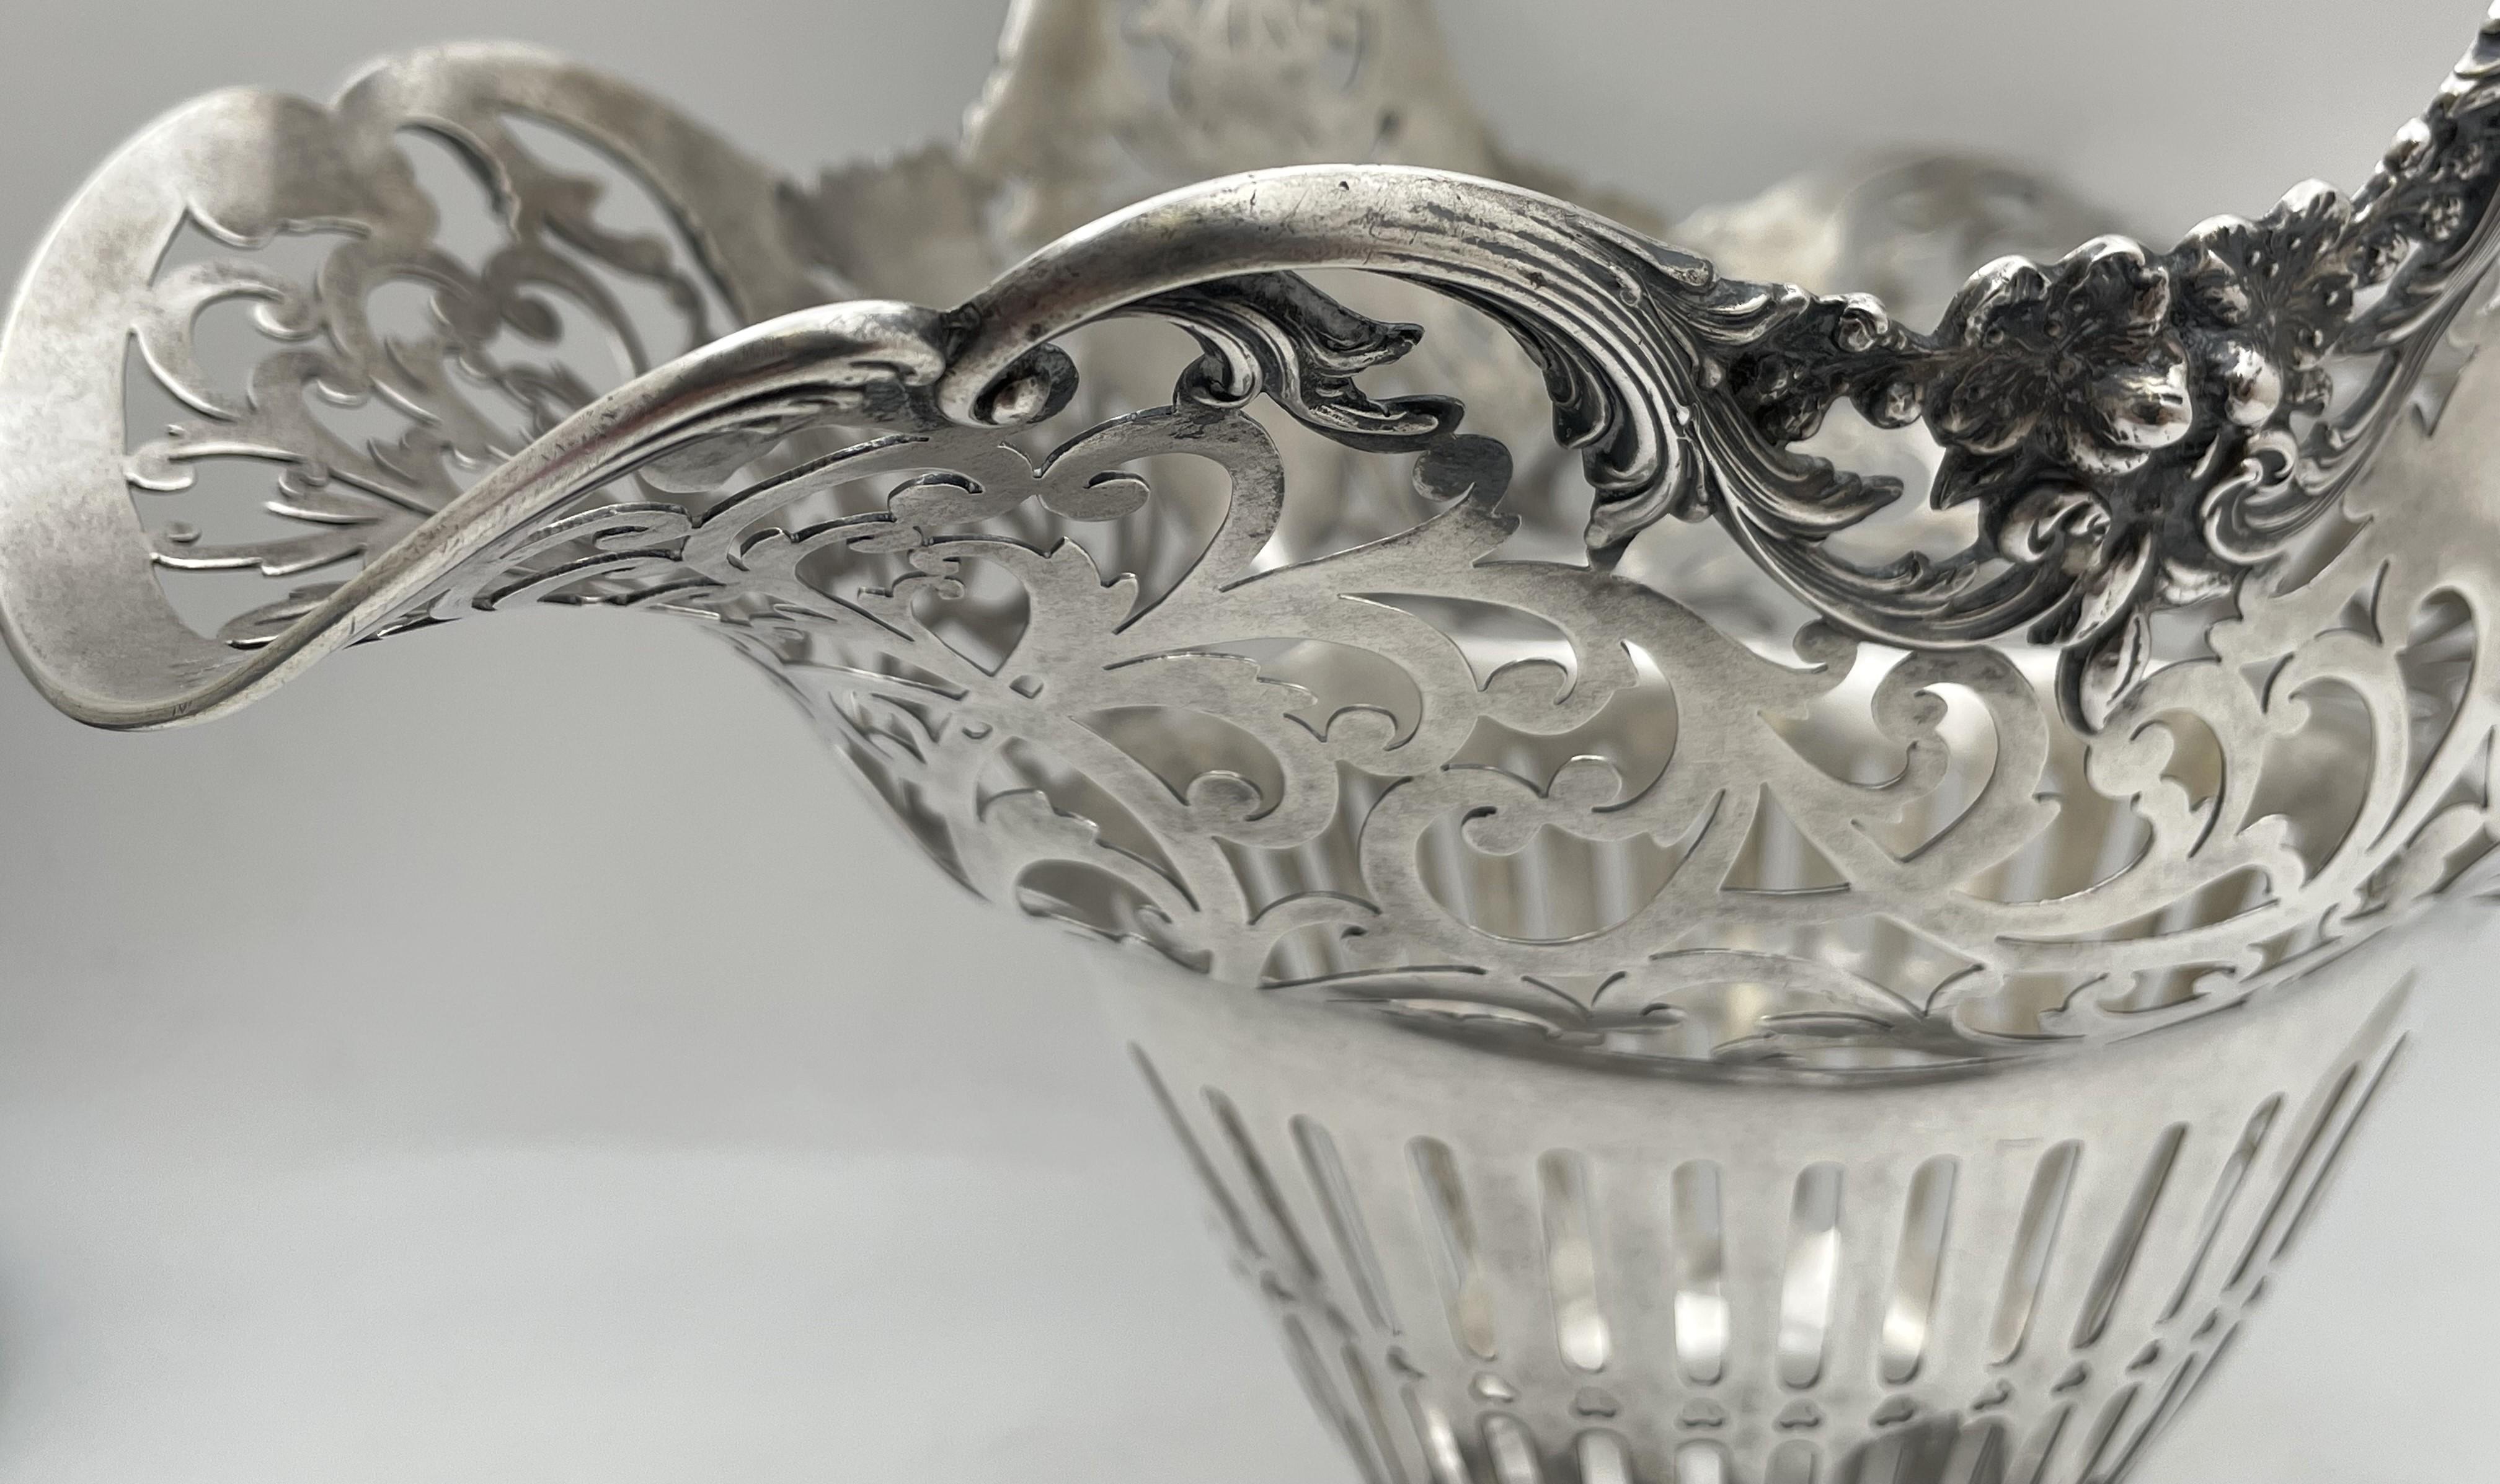 Reed & Barton Sterling Silver Basket Bowl Art Nouveau Style Early 20th Century For Sale 2